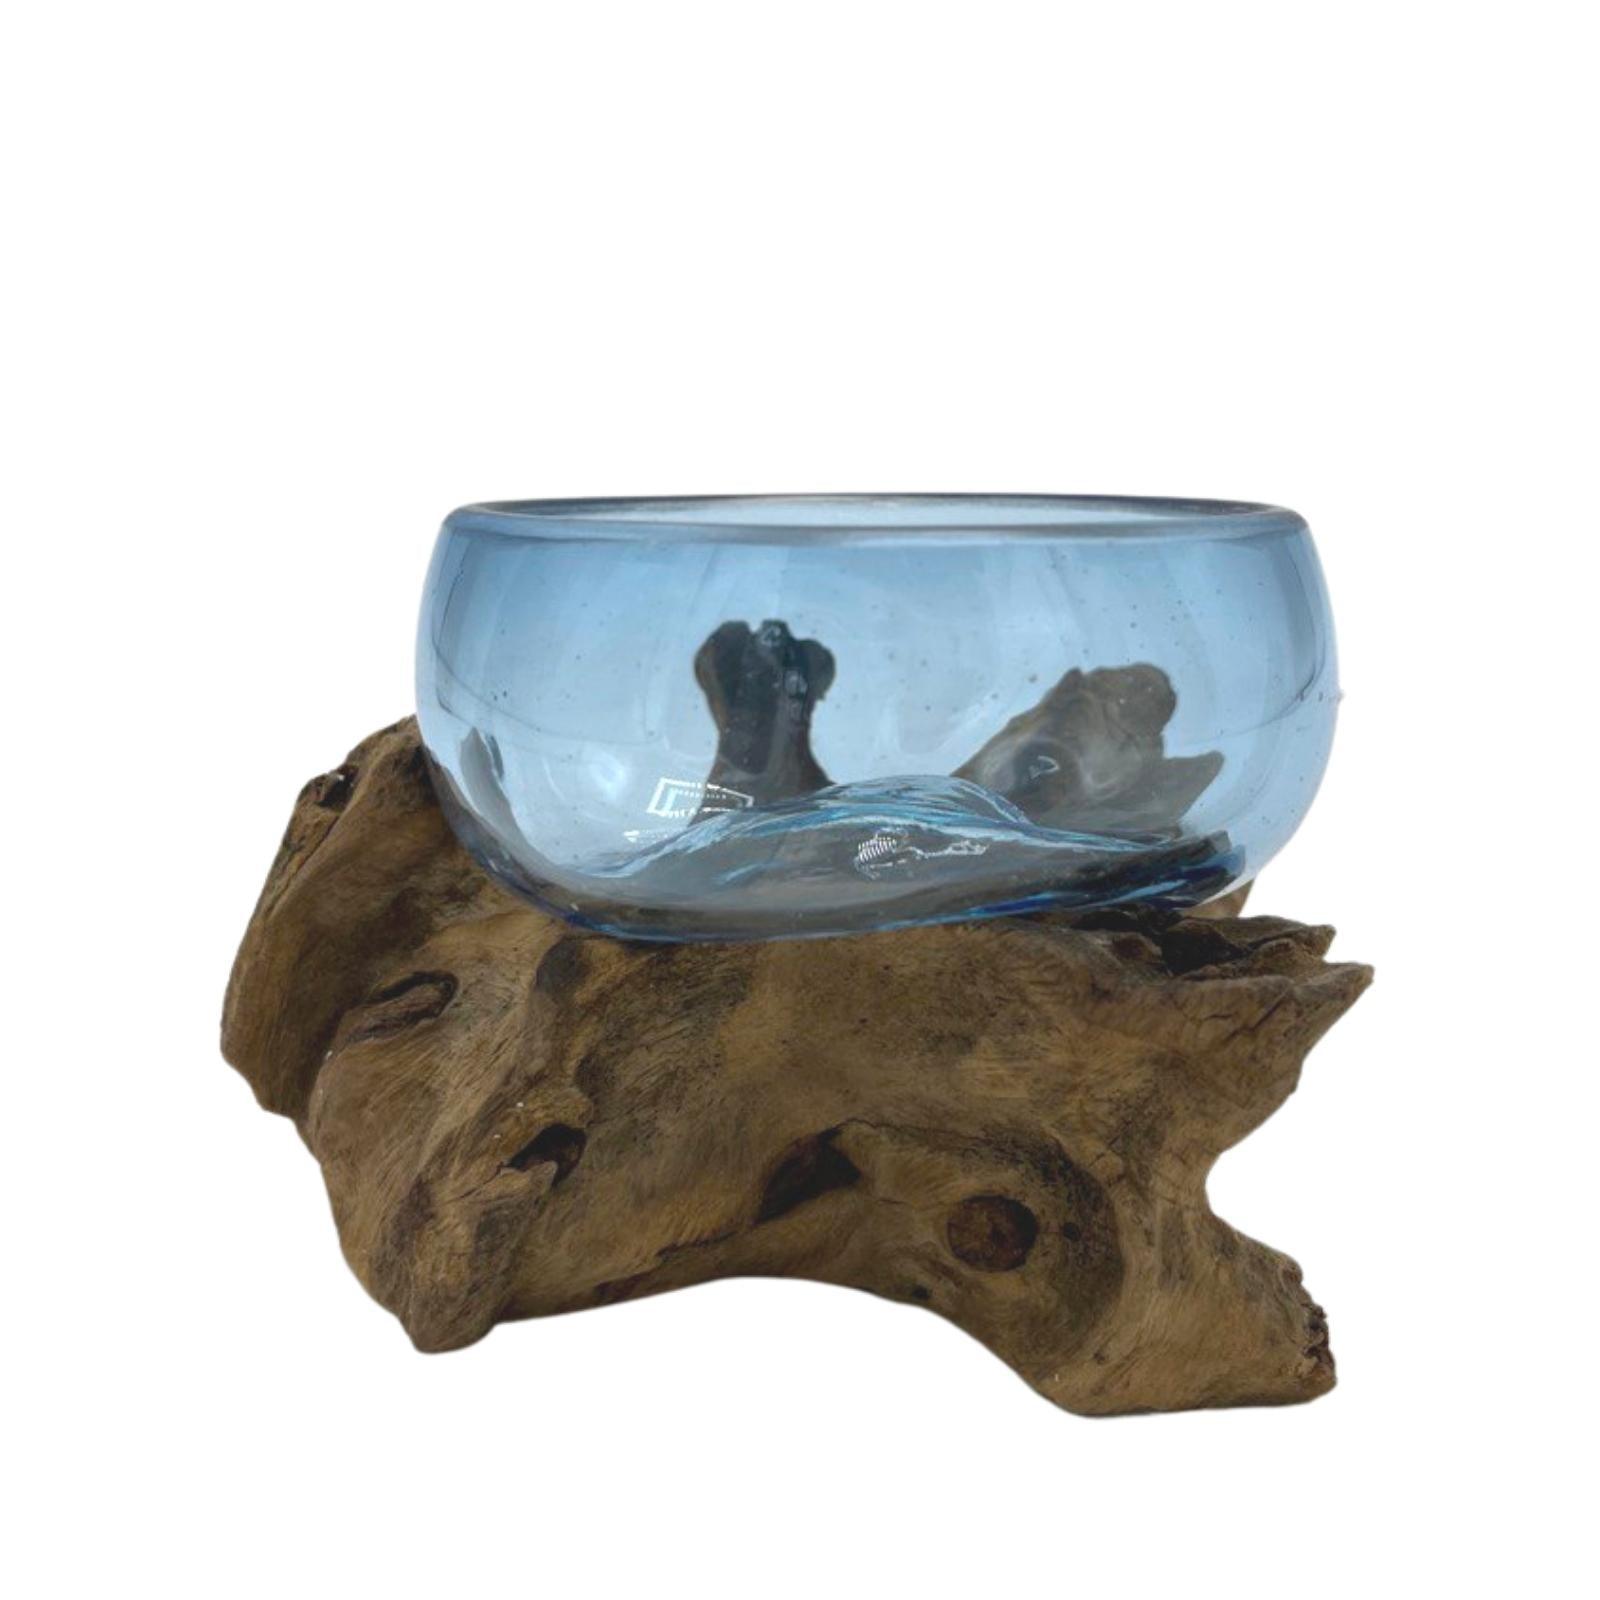 Molten Glass Mini Blue Bowl on Wood - Charming Spaces